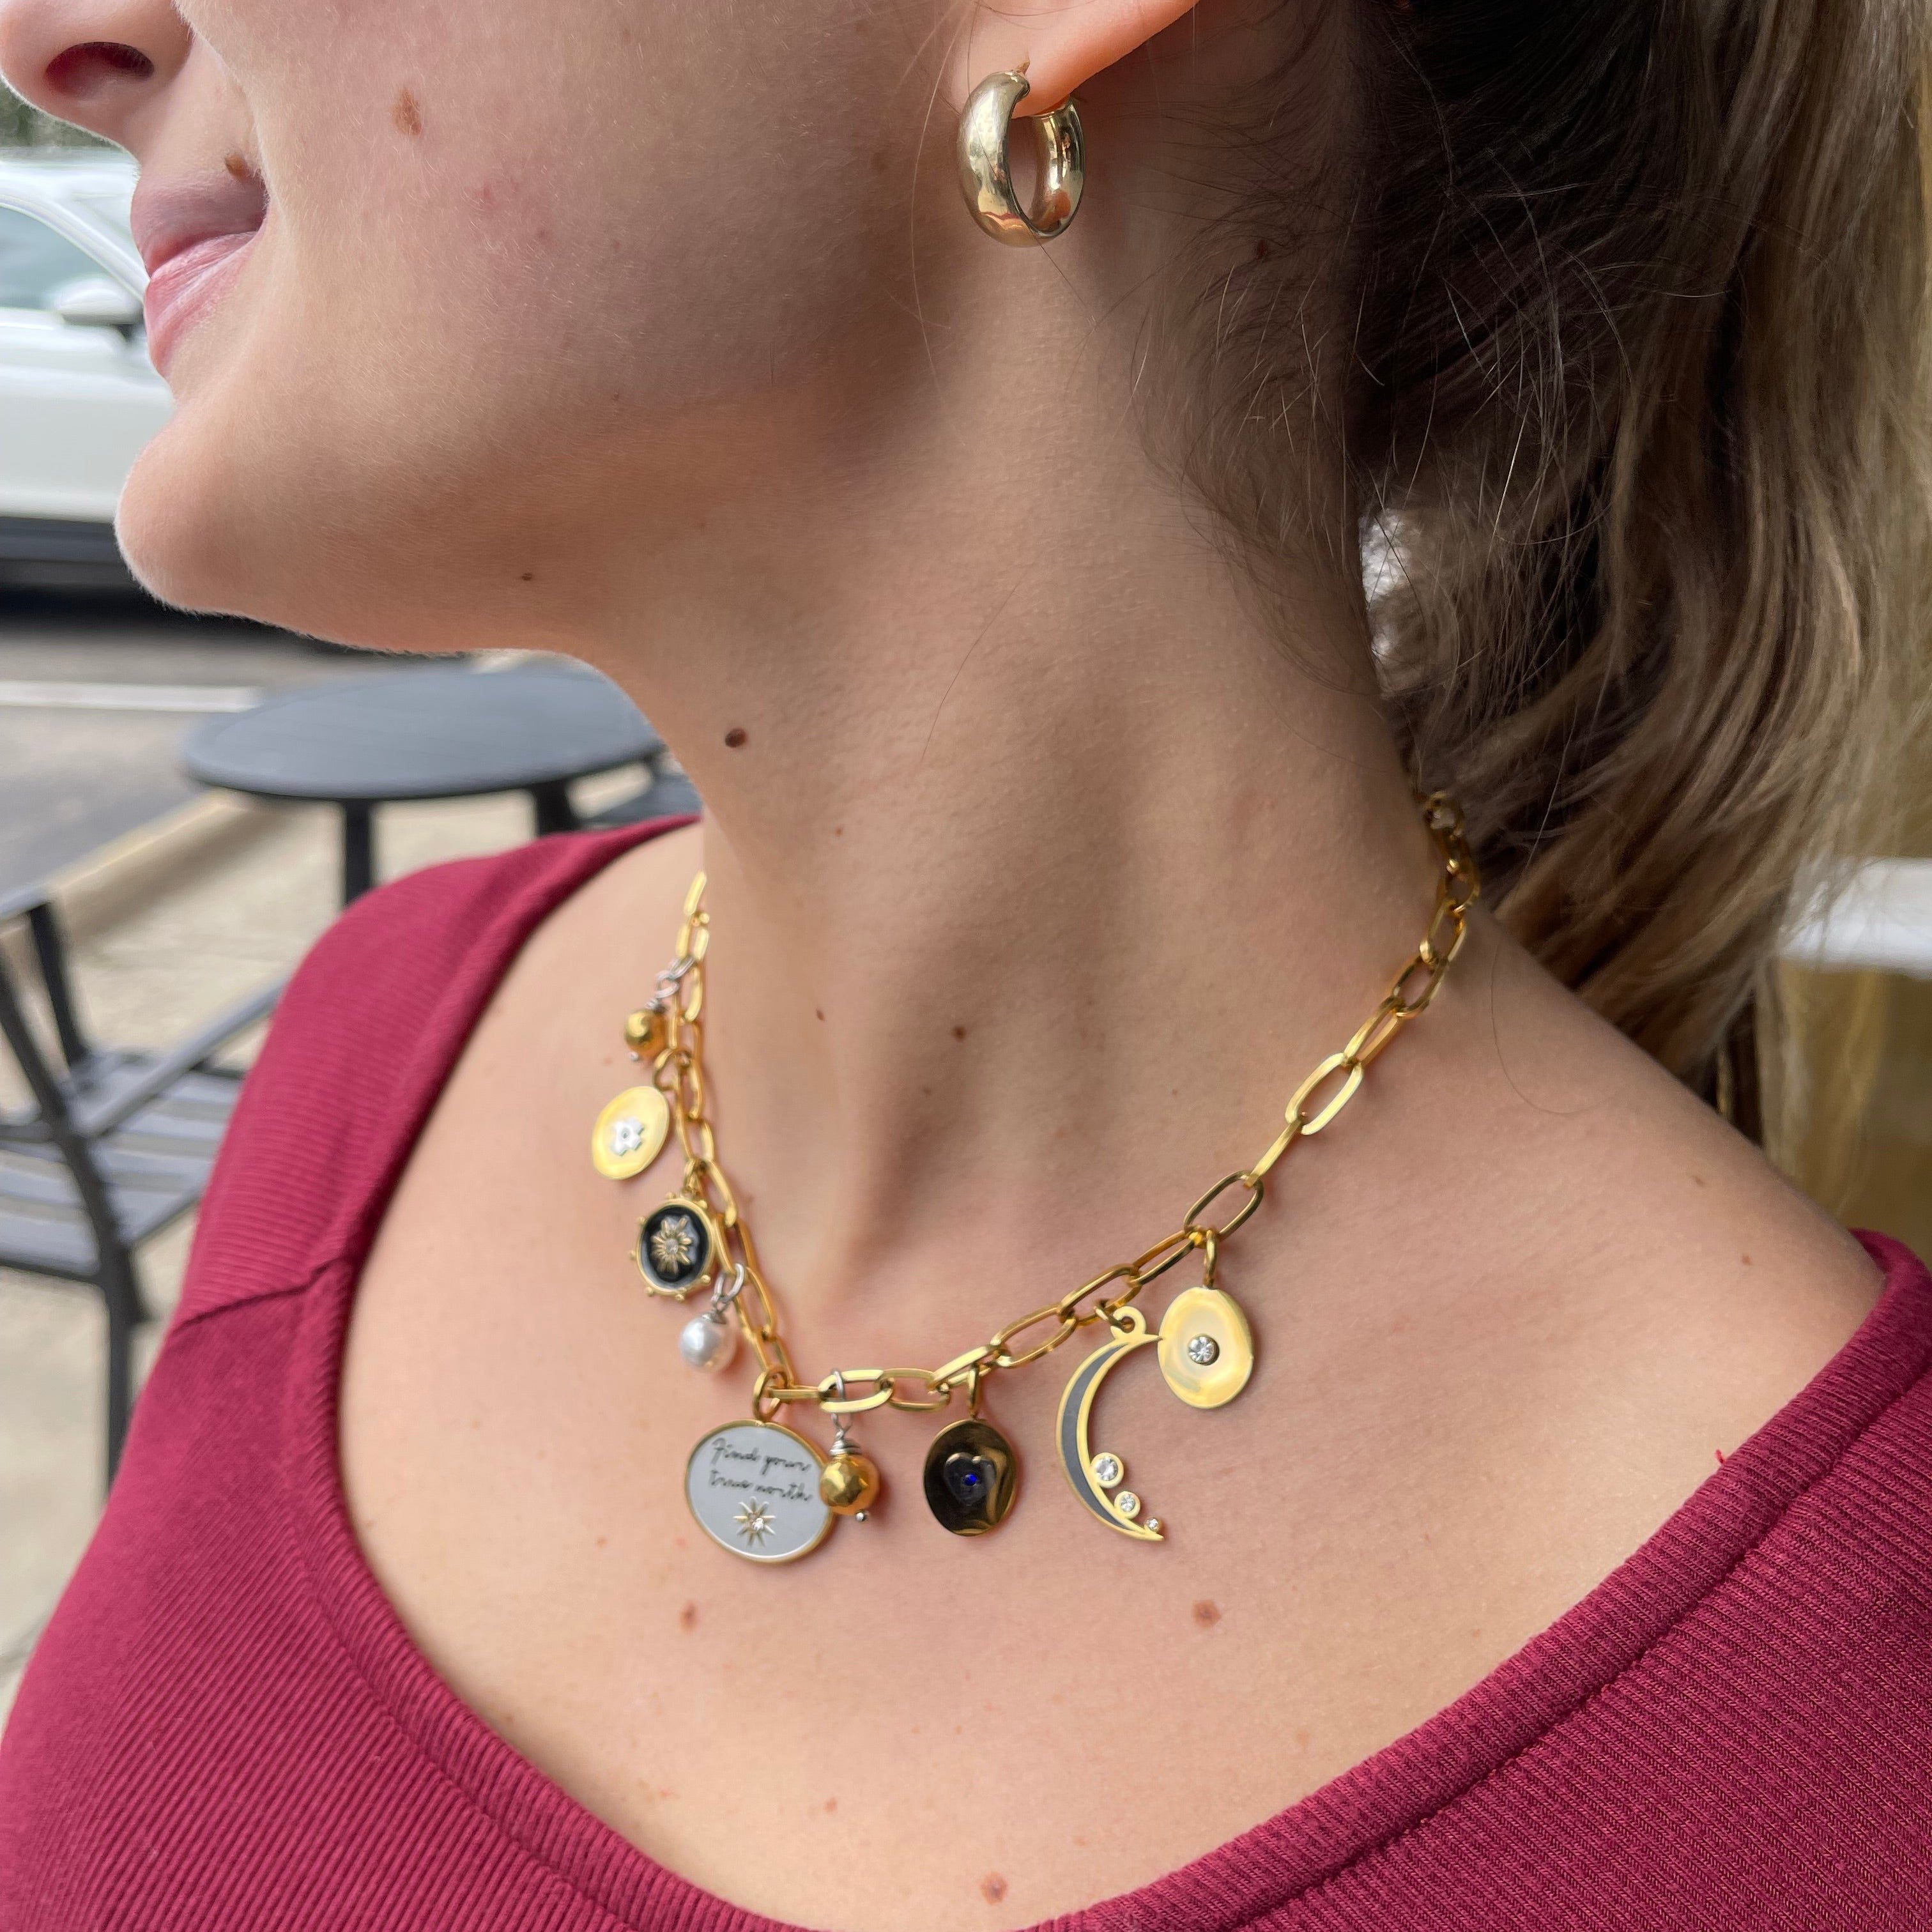 Find Your True North Charm Necklace - AMD COLLECTIVE